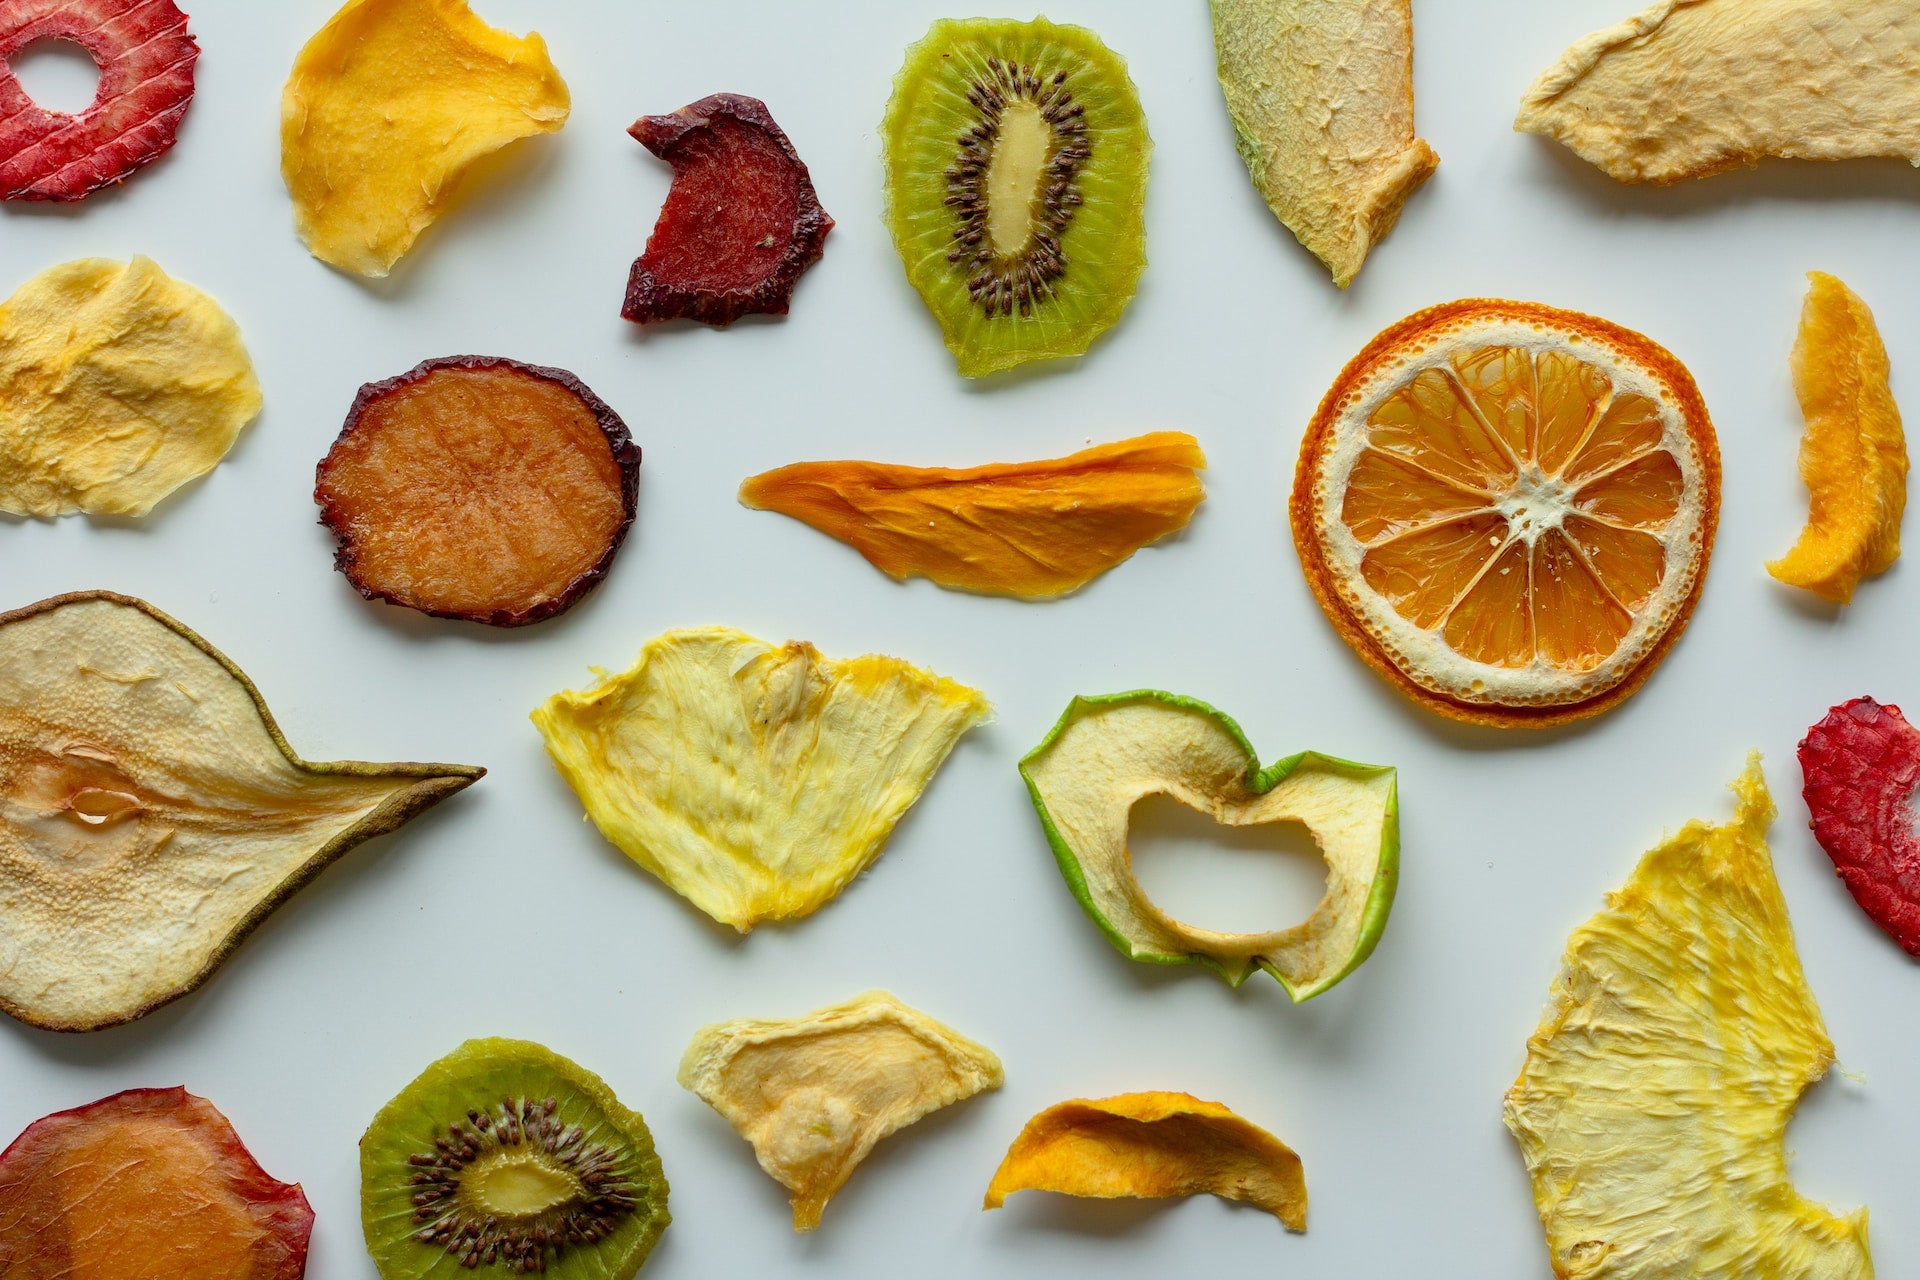 10 Awesome Snacks for the Health-Conscious Snacker